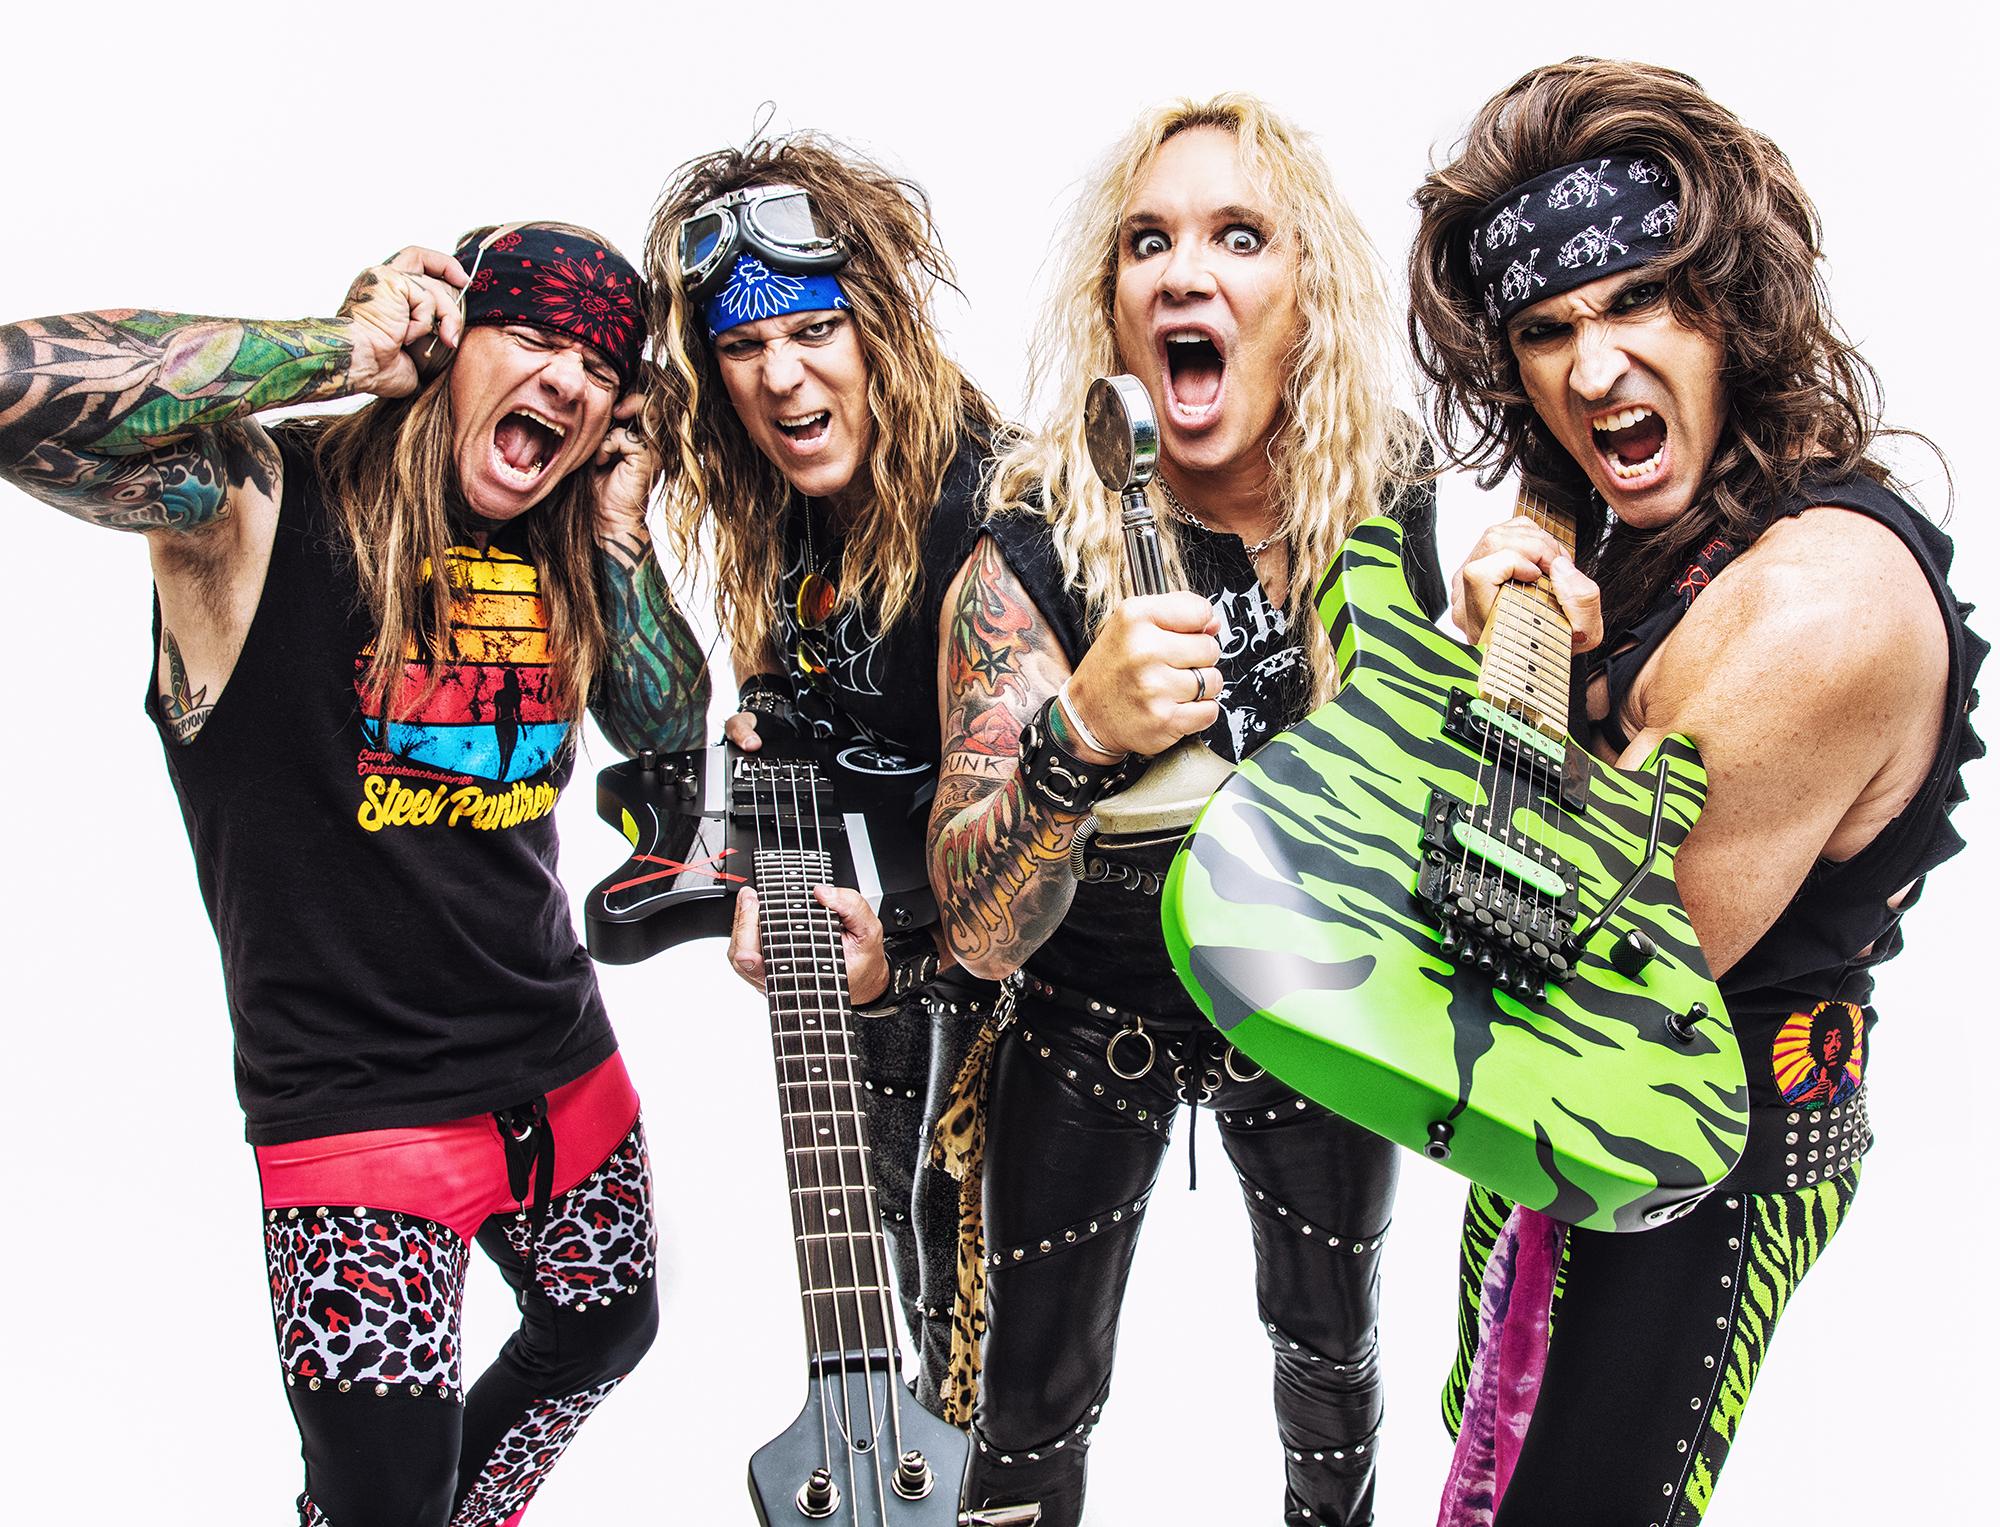 Steel Panther (USA)